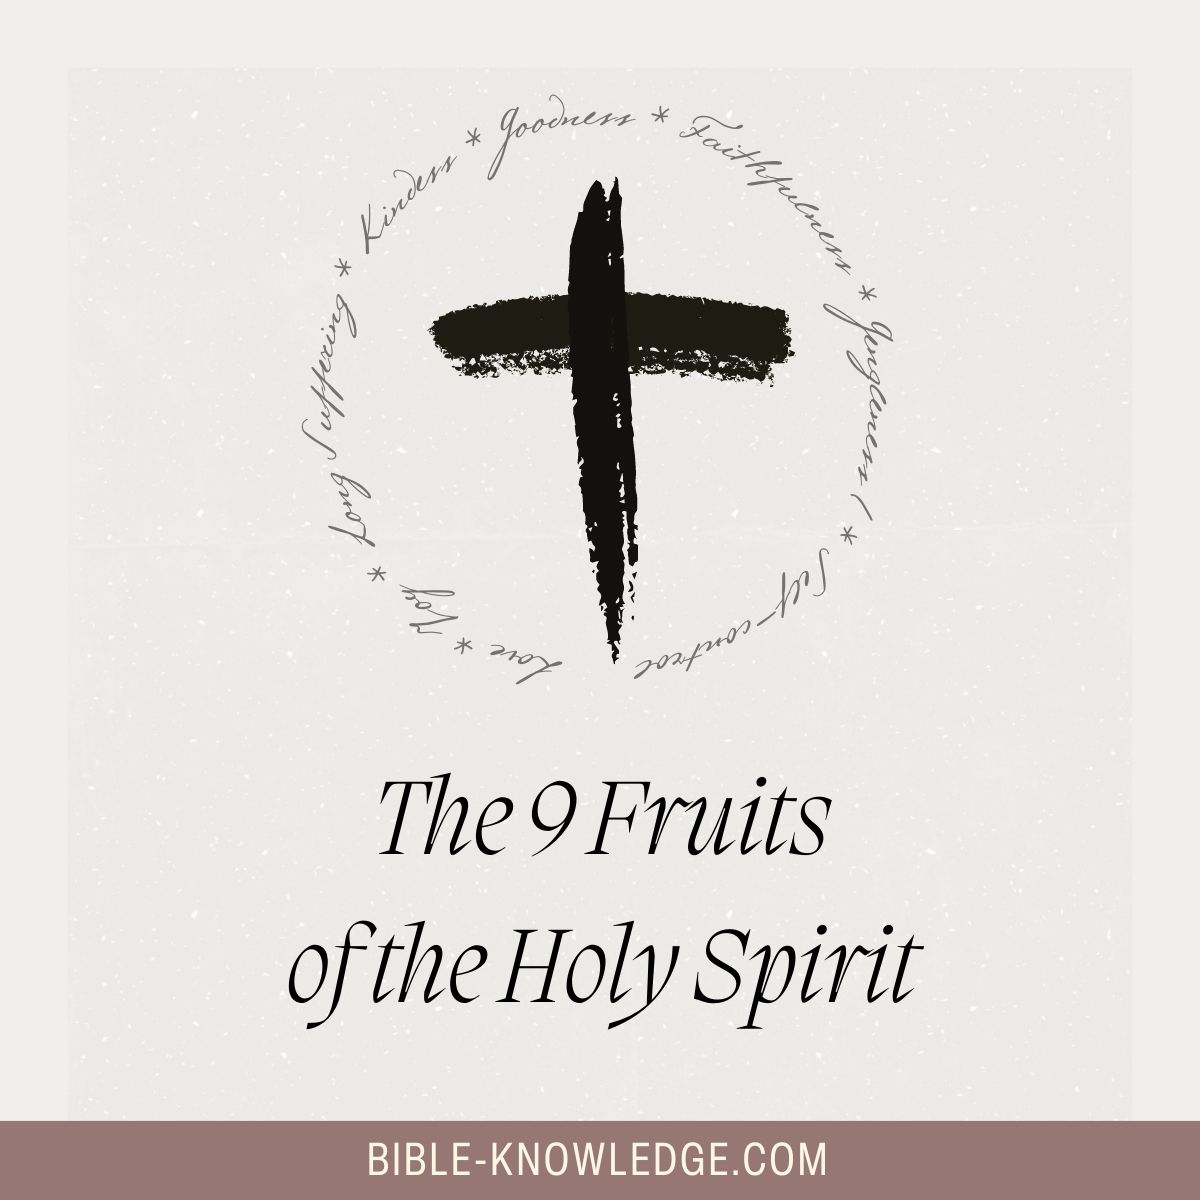 The 9 Fruits of the Holy Spirit